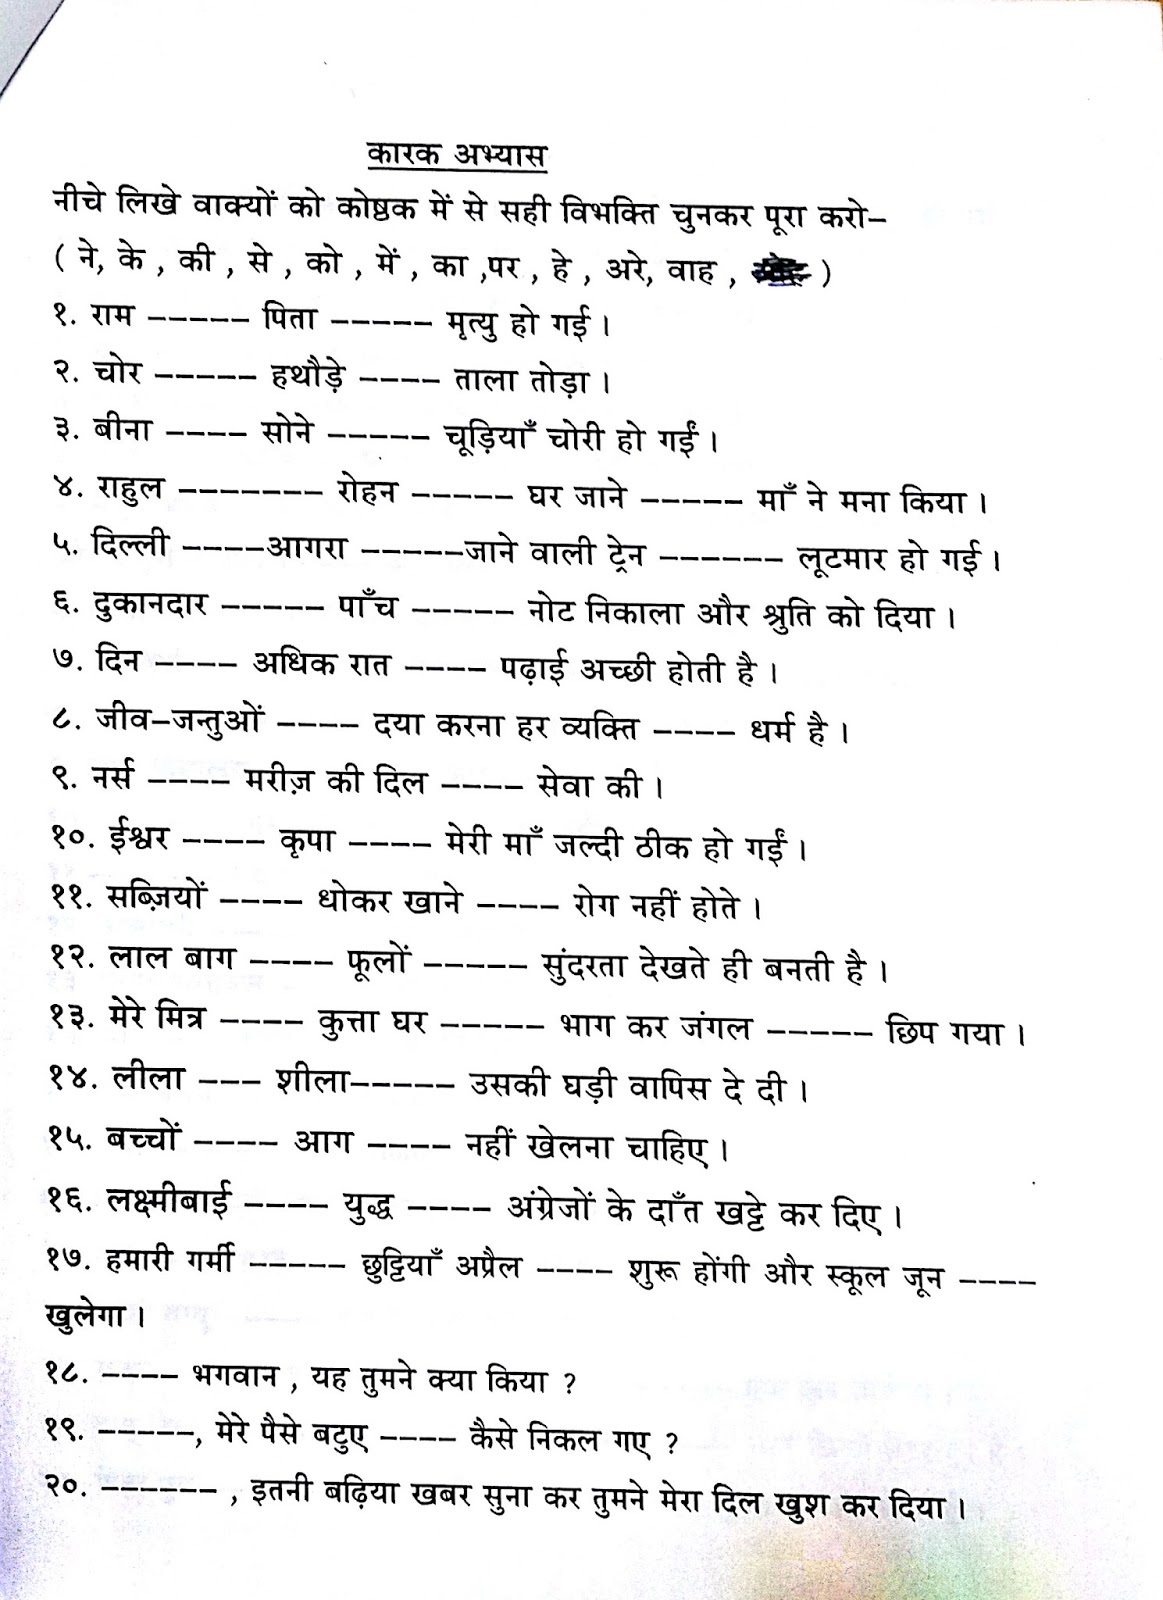 hindi-grammar-work-sheet-collection-for-classes-5-6-7-8-cases-or